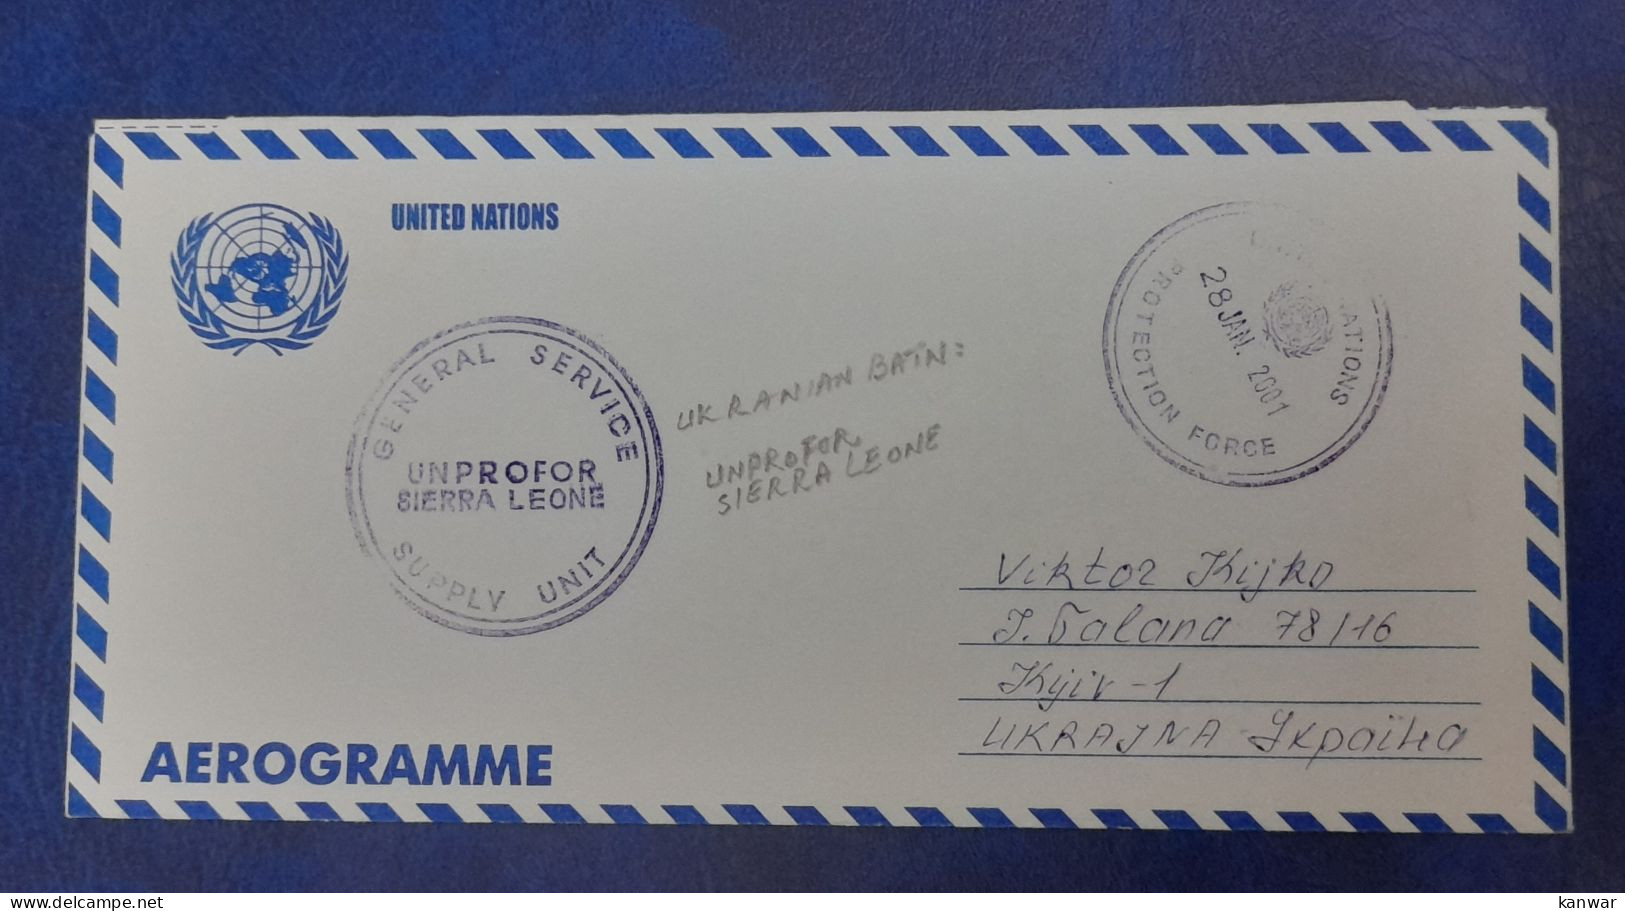 Used Aerogramme Ukranian Batn Unprofor Sierra Leone 2011 Cover Peace Keeping Forces United Nations - Militaria